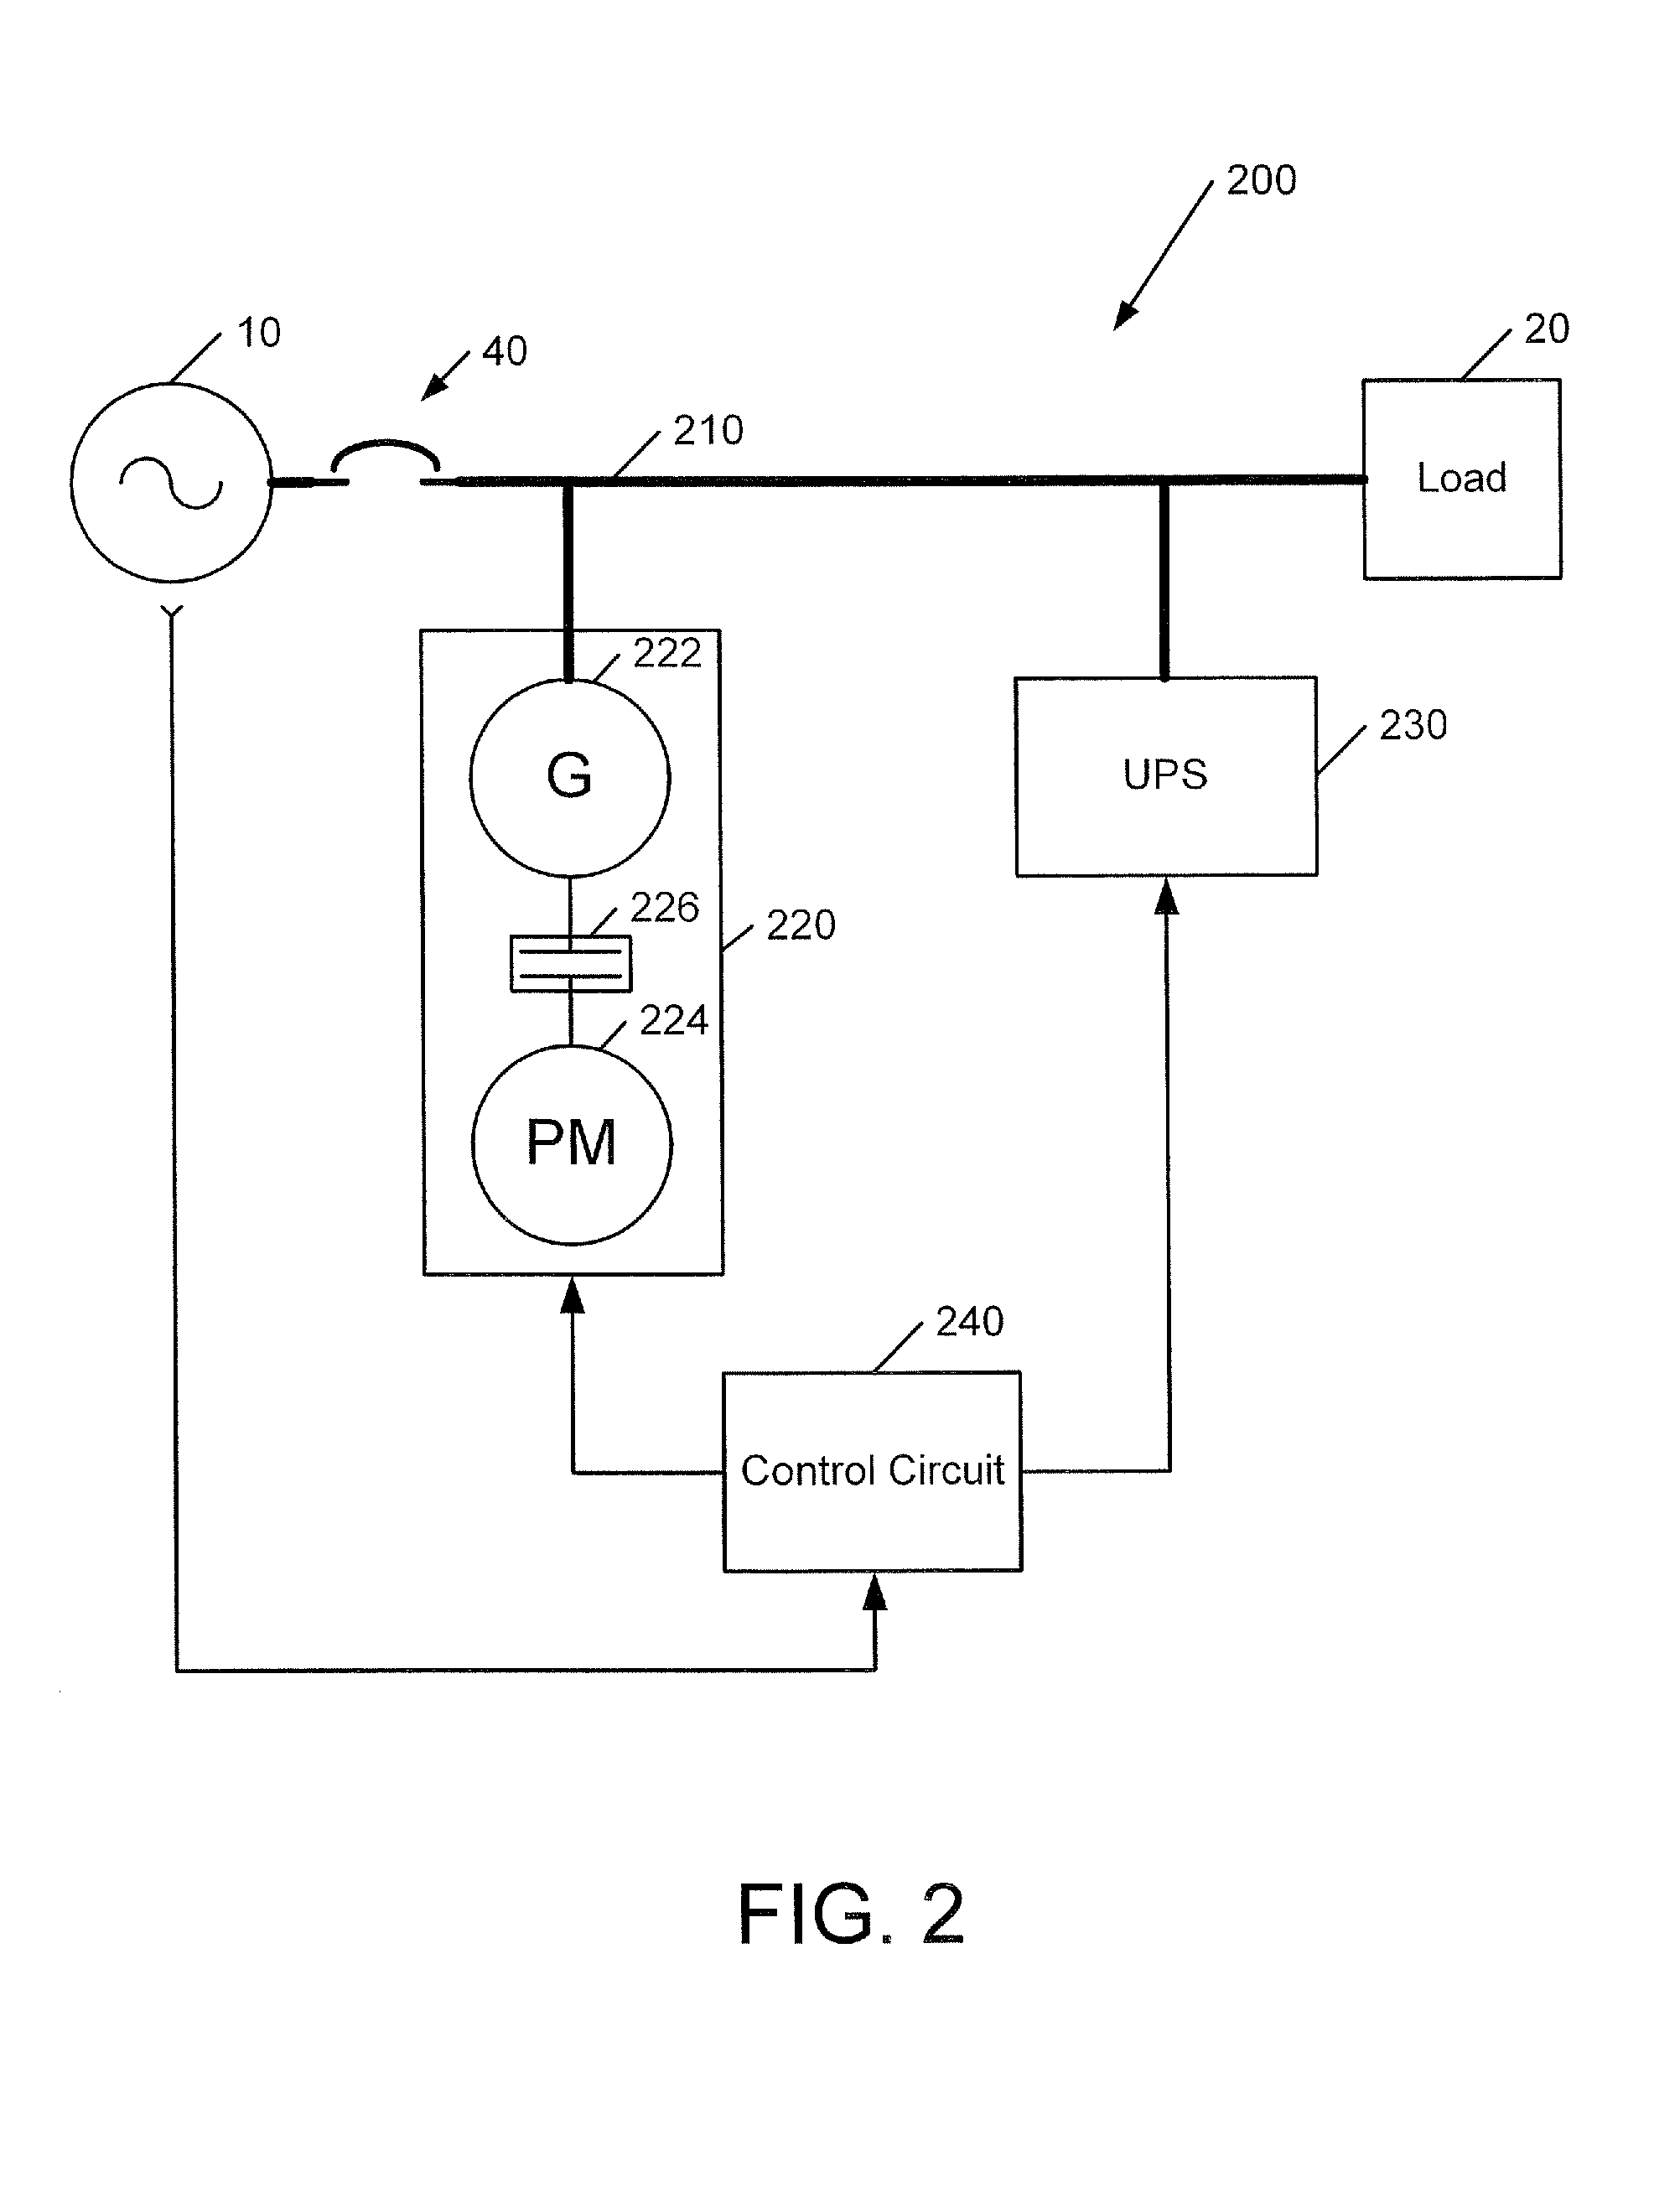 Power systems and methods using an induction generator in cooperation with an uninterruptible power supply